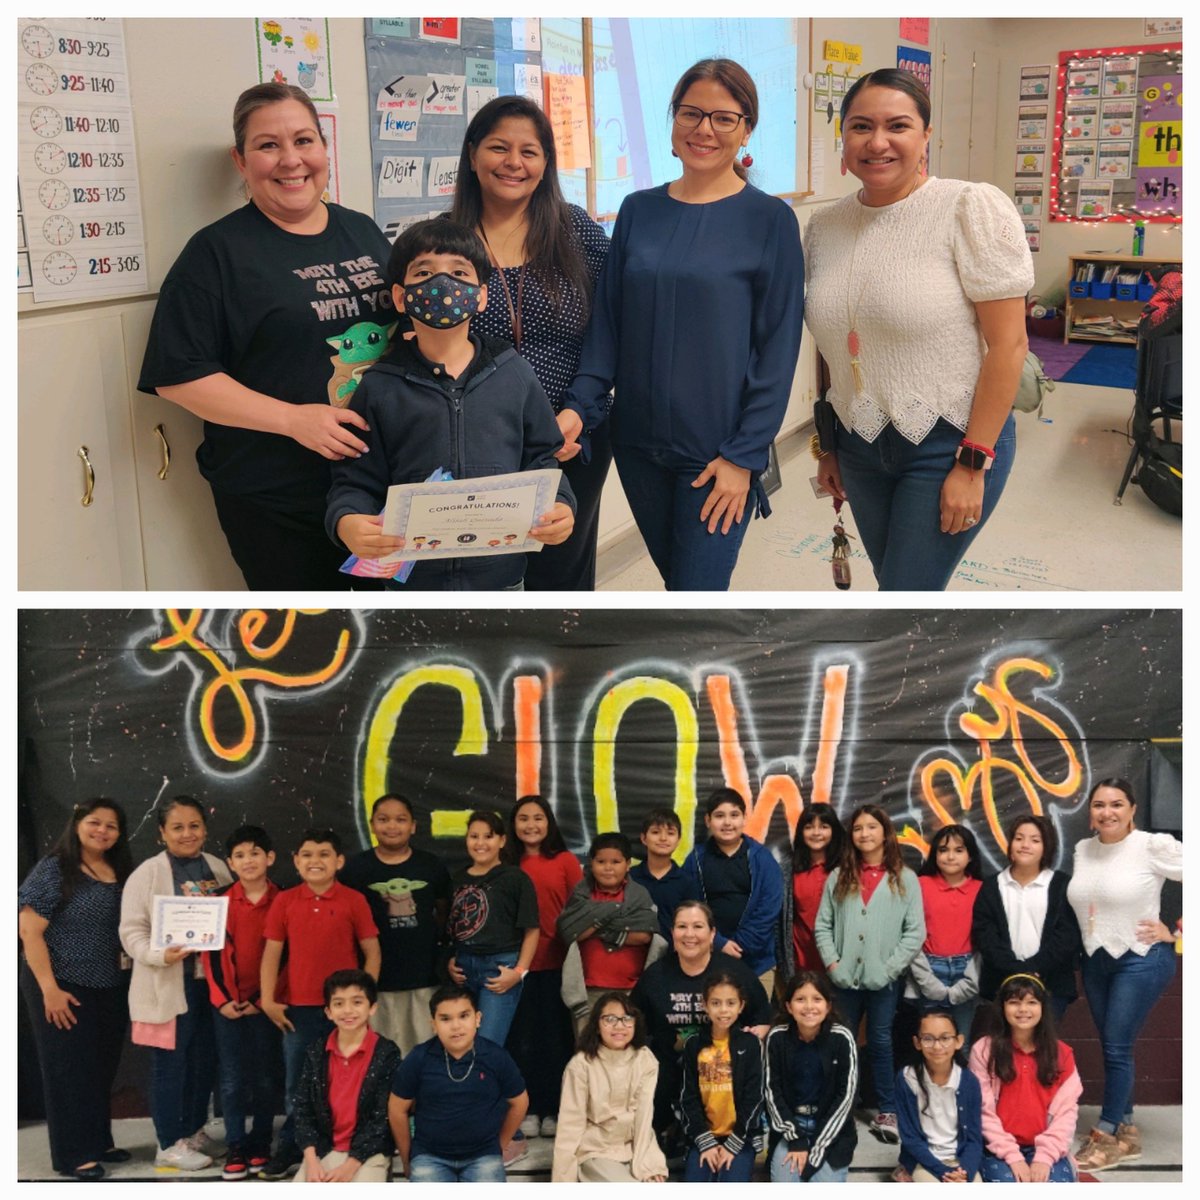 Congratulations to these wonderful students from @LFEtheplacetobe who won the Imagine Math Campus Top Student contest: Alijah (2nd grade) and Ethan (4th grade)!! 🏆🎉👏 @lsalazar14833 @LaEdelacruz127 @ImagineLearning @tudon26